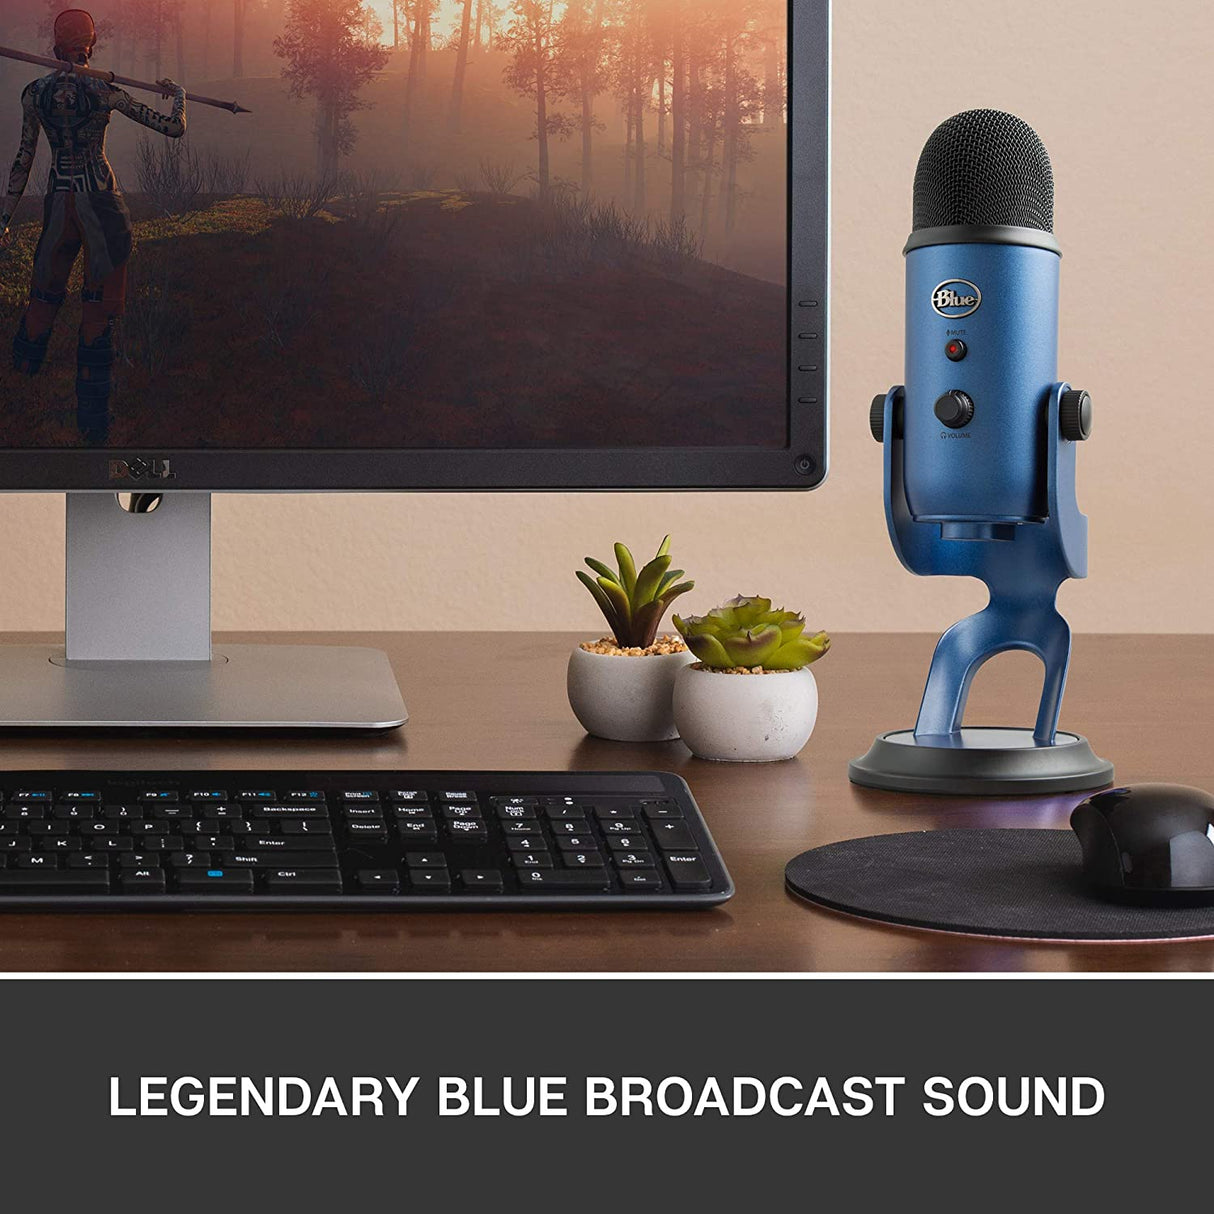 Blue microphones Blue Yeti USB Microphone for Recording, Streaming, Gaming, Podcasting on PC and Mac, Condenser Mic for Laptop or Computer with Blue VO!CE Effects, Adjustable Stand, Plug and Play – Midnight Blue